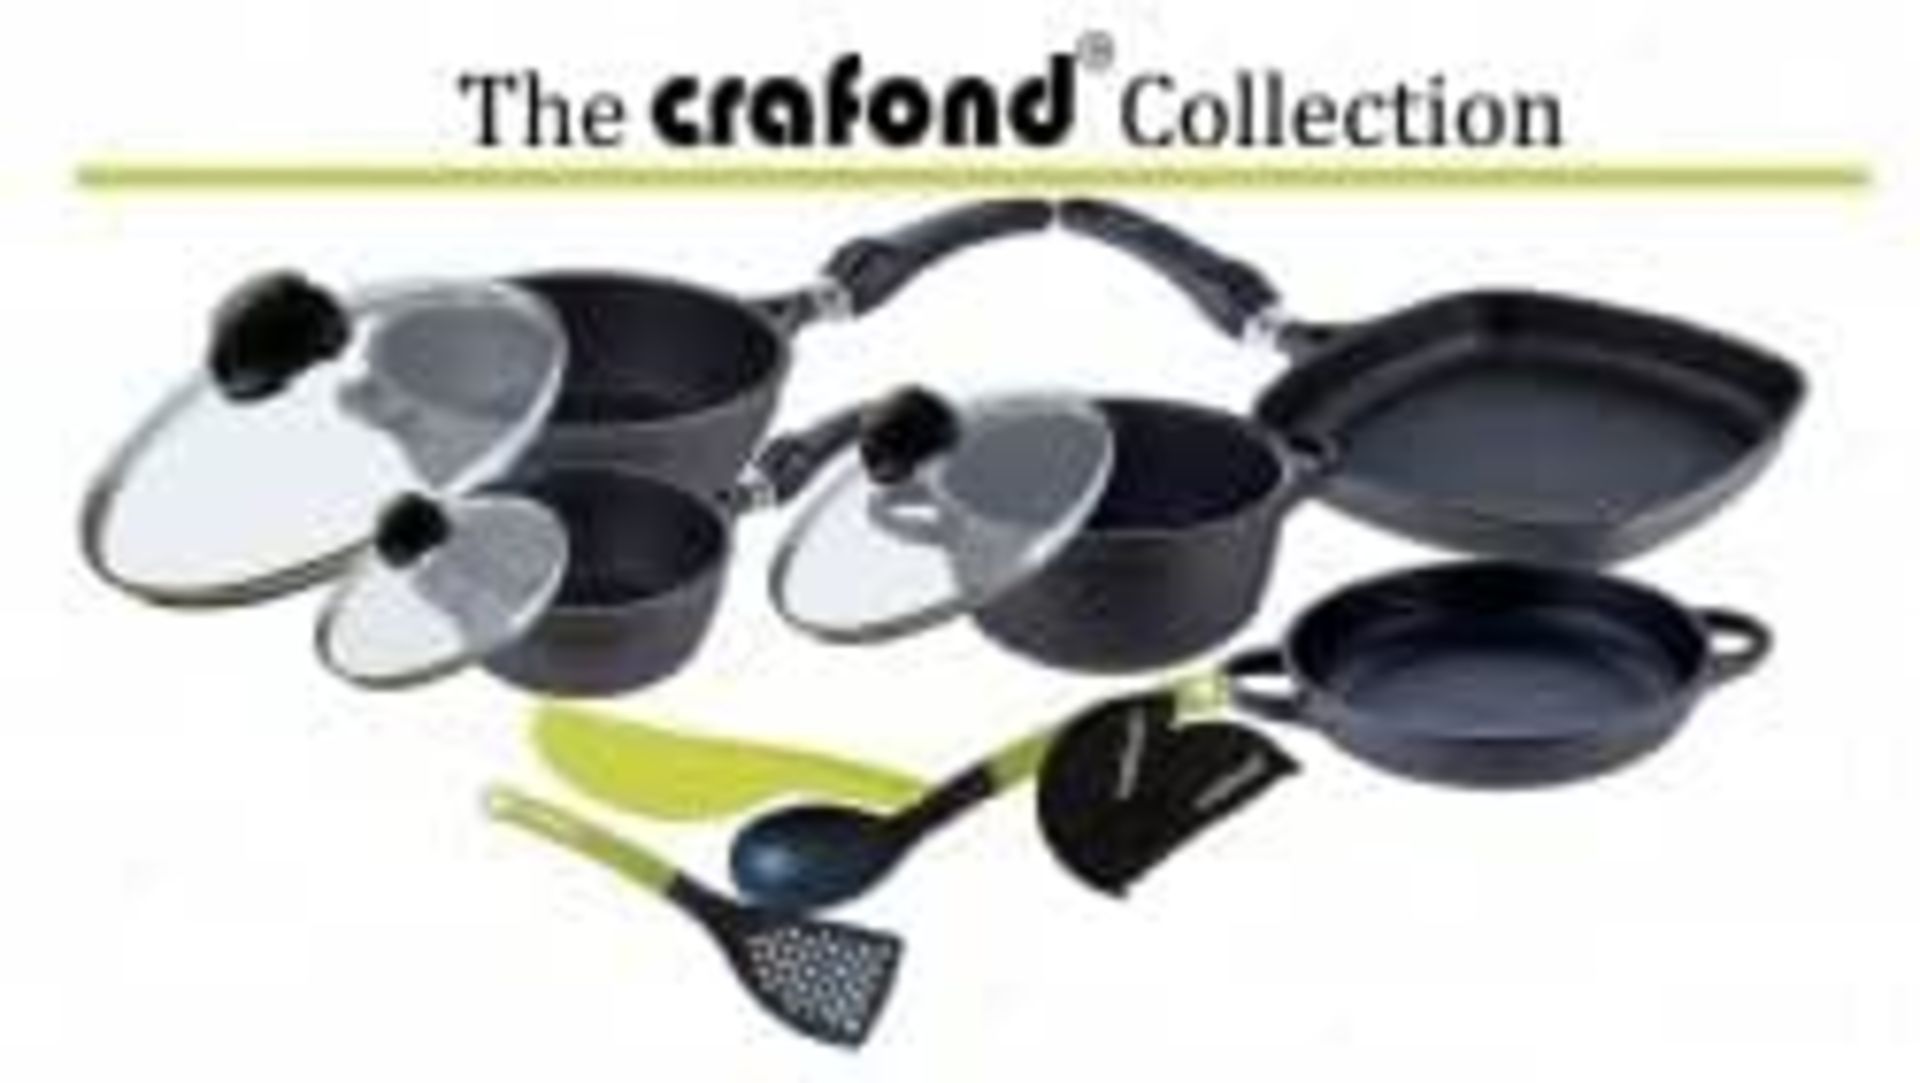 Crafond 16cm Saucepan with fixed handle and lid. - Image 2 of 3